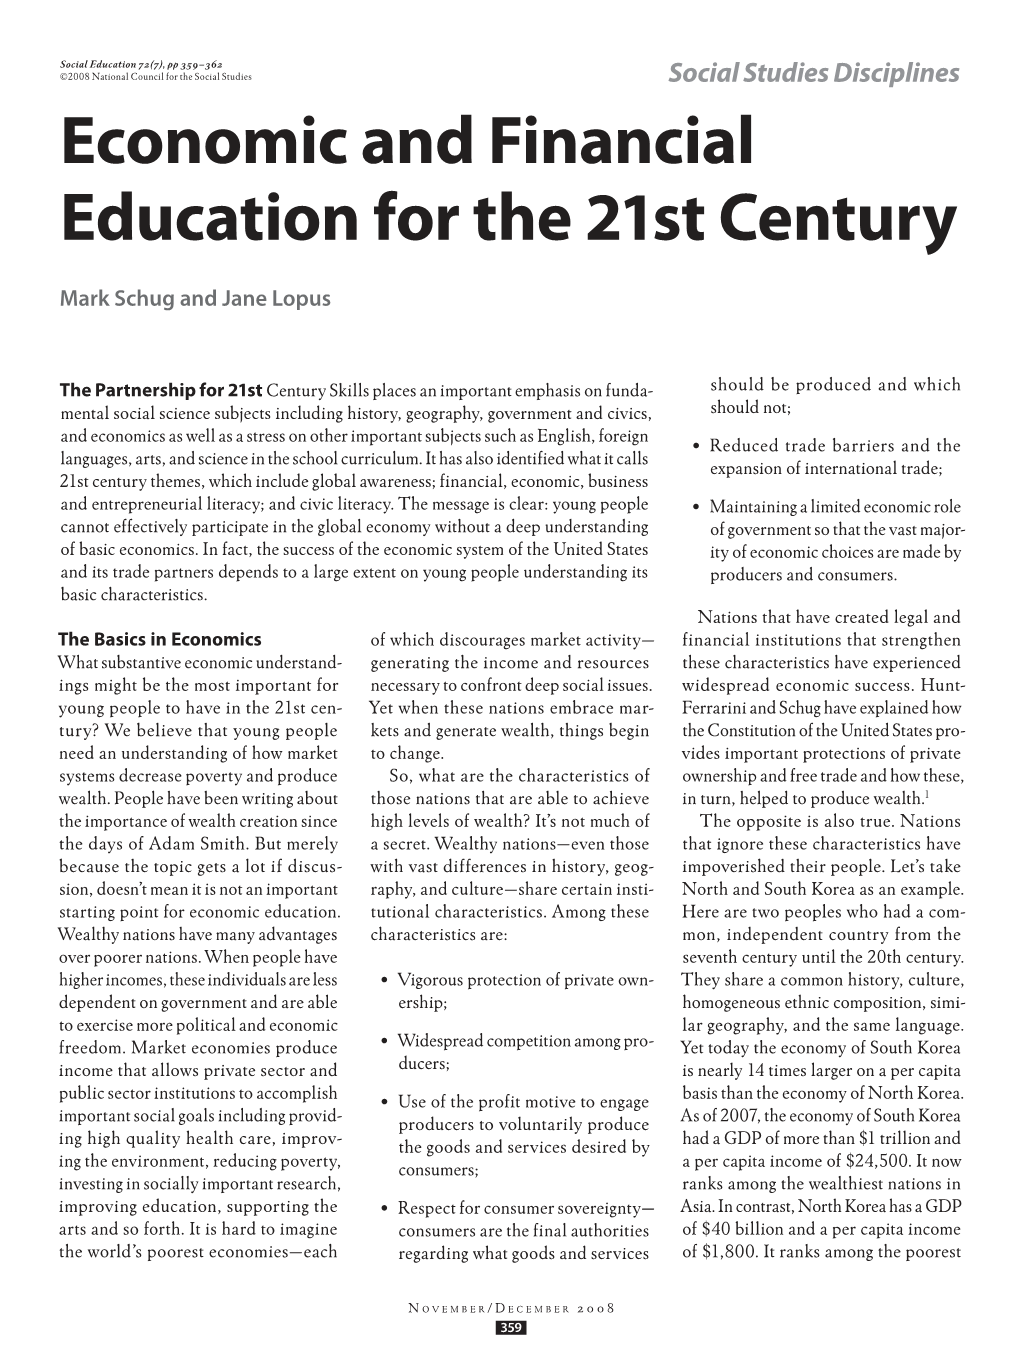 Economic and Financial Education for the 21St Century